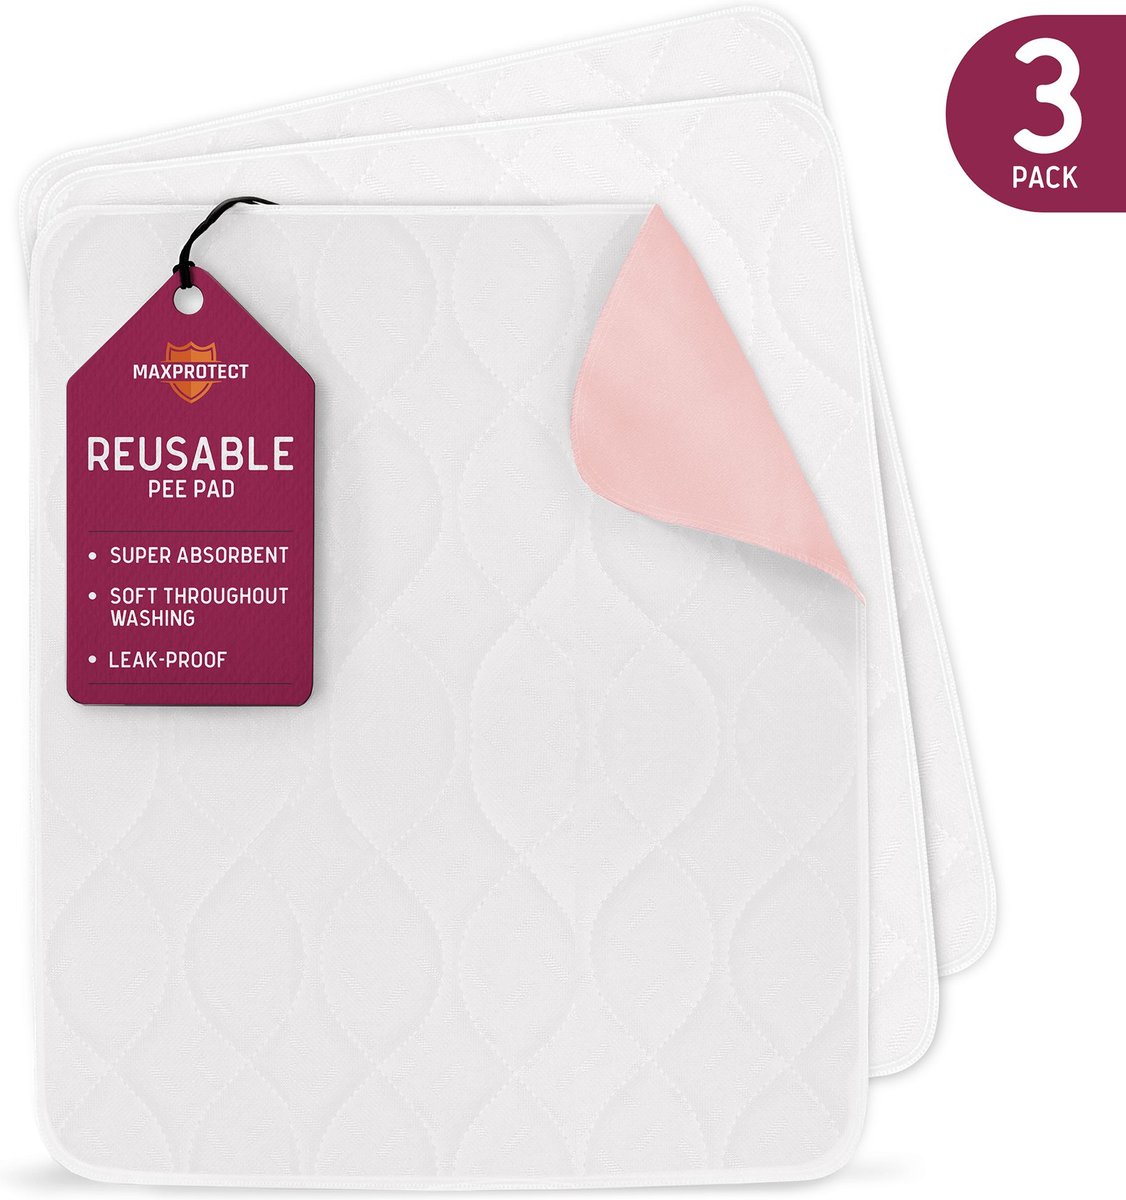 Washable Bed Pads Chair Pads / Incontinence Small Underpad - 18x24 - 4 Pack  